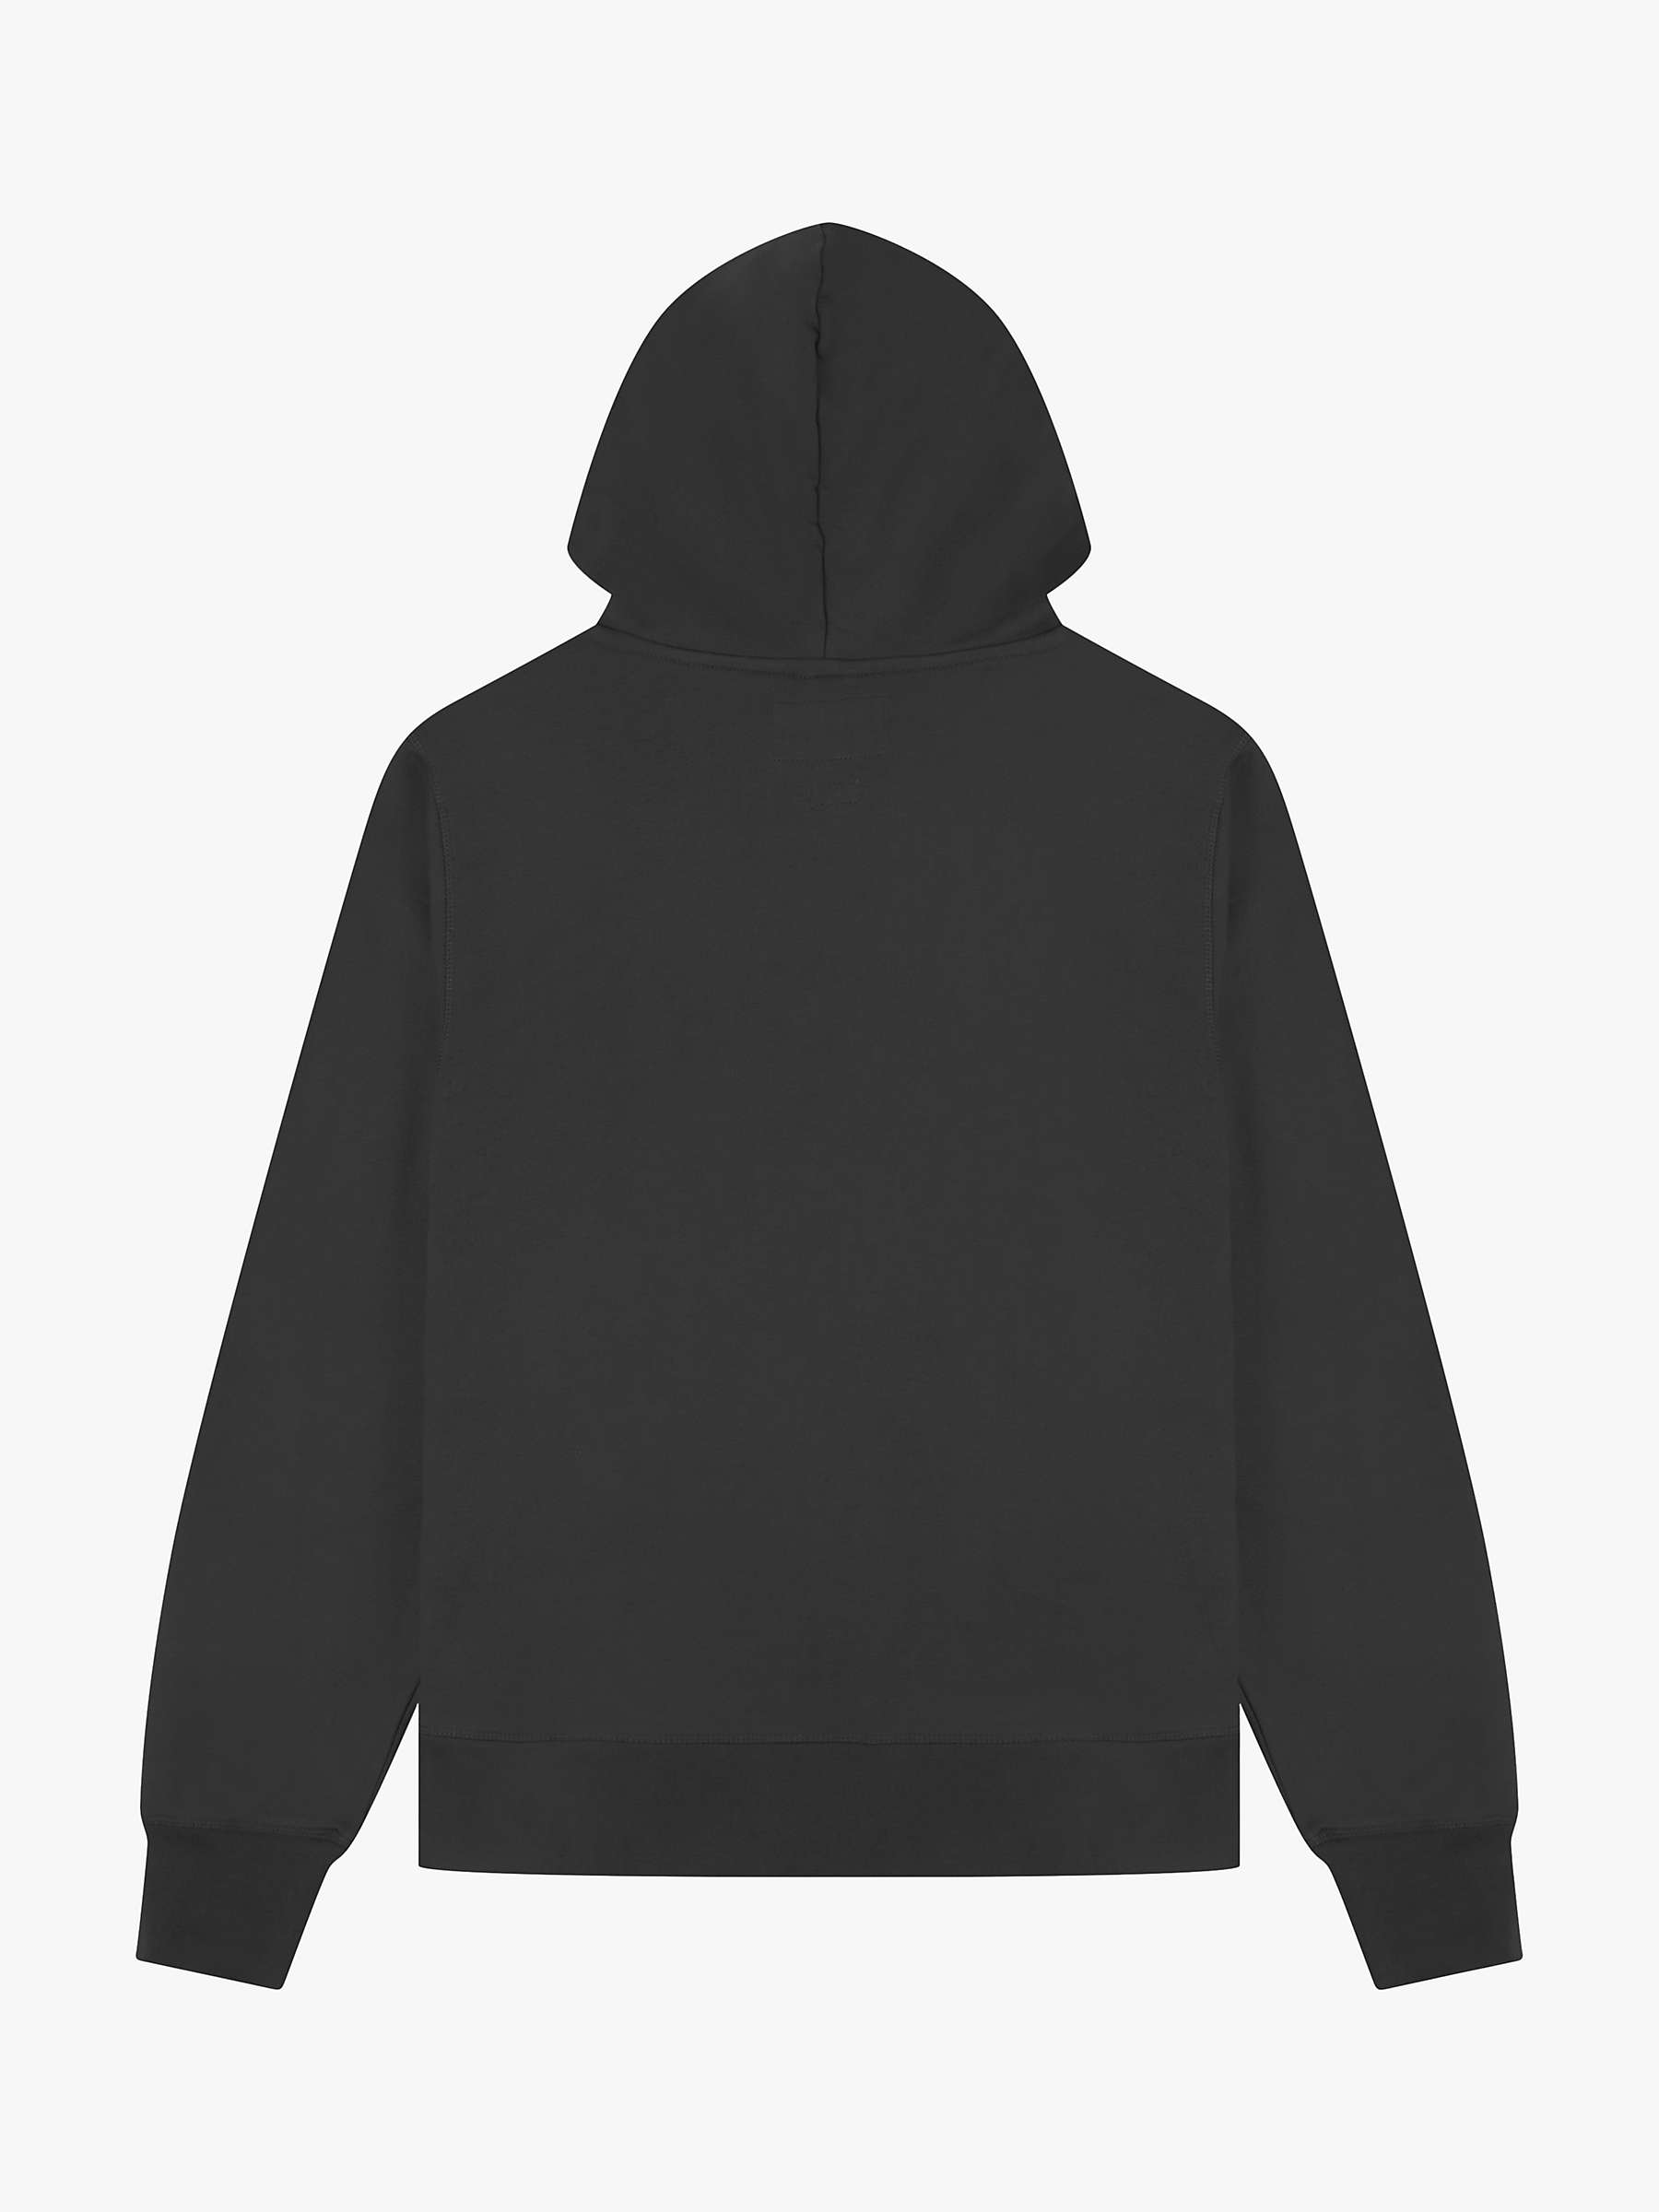 Buy Uskees Organic Cotton Hoodie, Faded Black Online at johnlewis.com